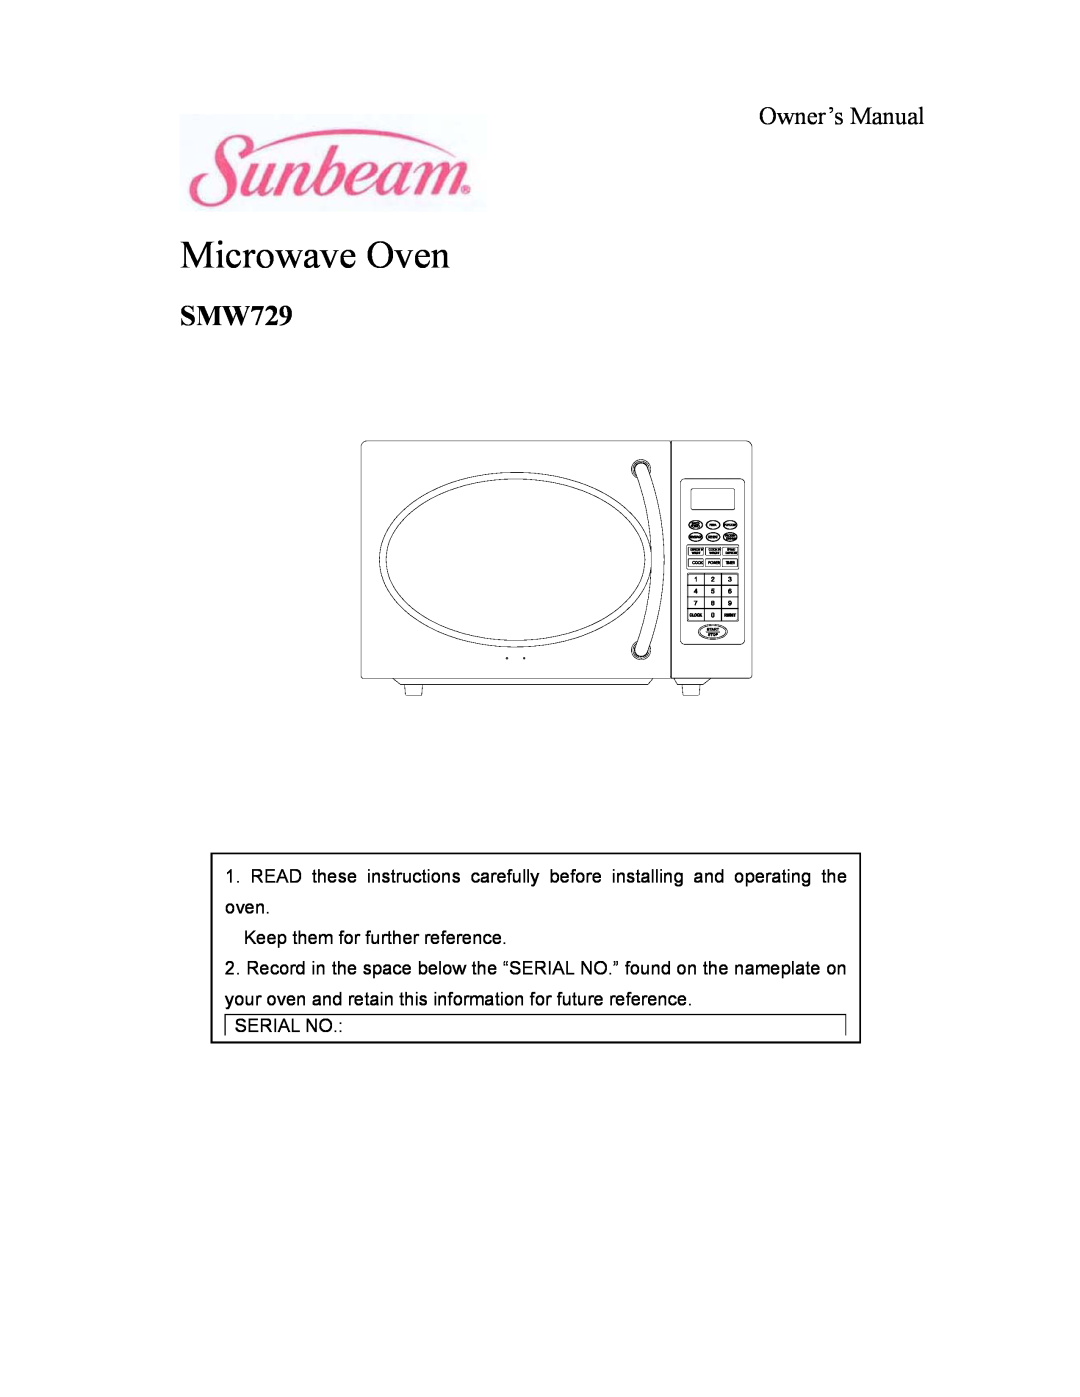 Sunbeam SMW729 owner manual Microwave Oven 